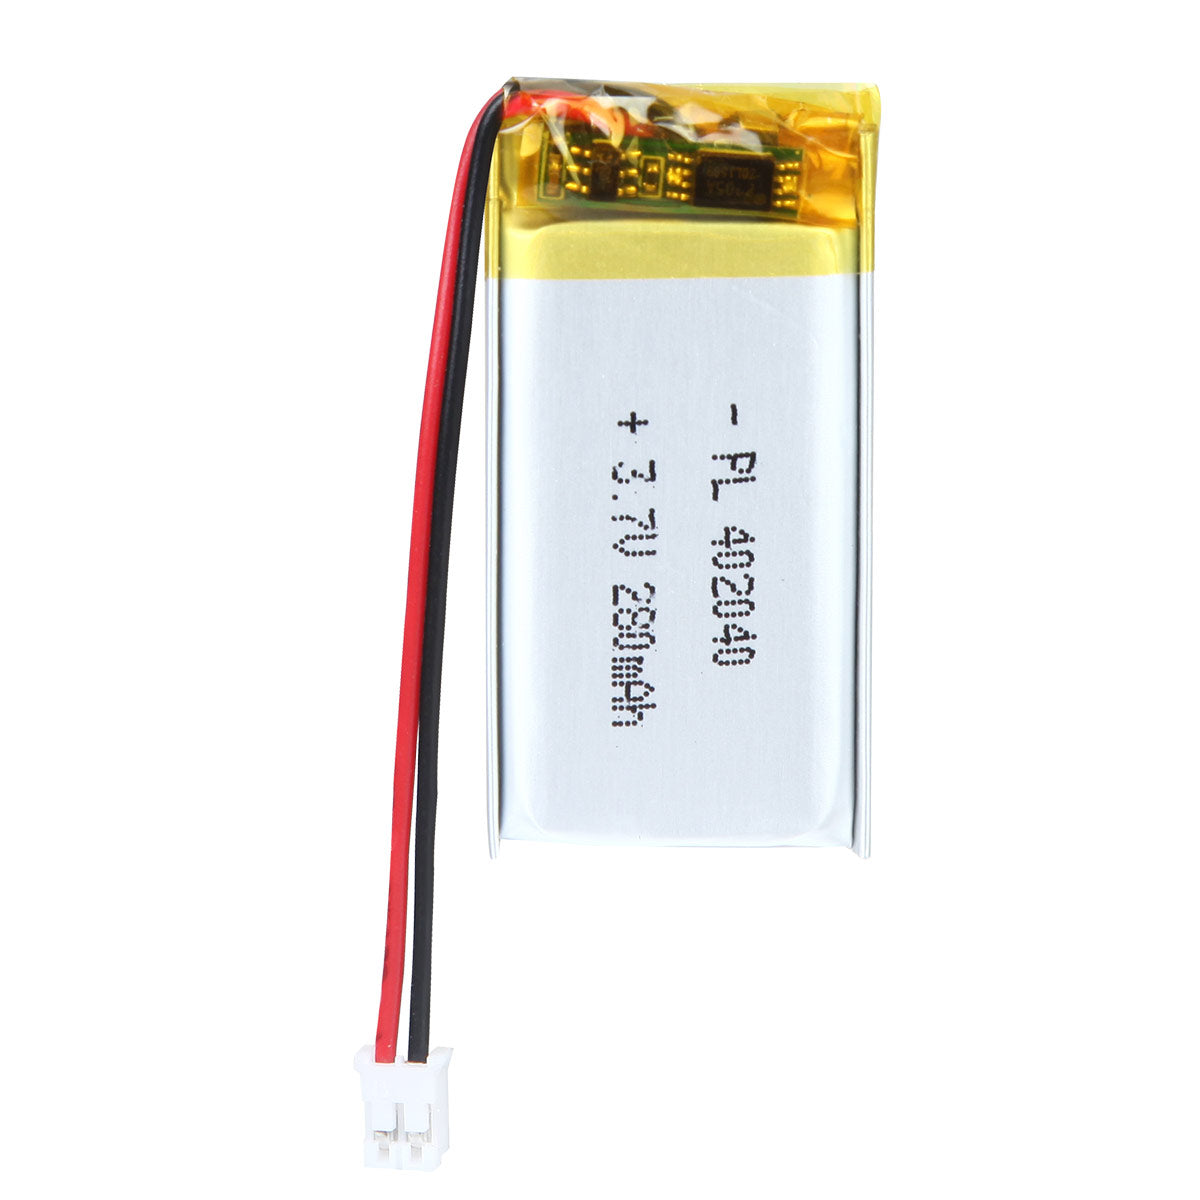 YDL 3.7V 280mAh 402040 Rechargeable Lipo Battery with JST Connector - YDL Battery